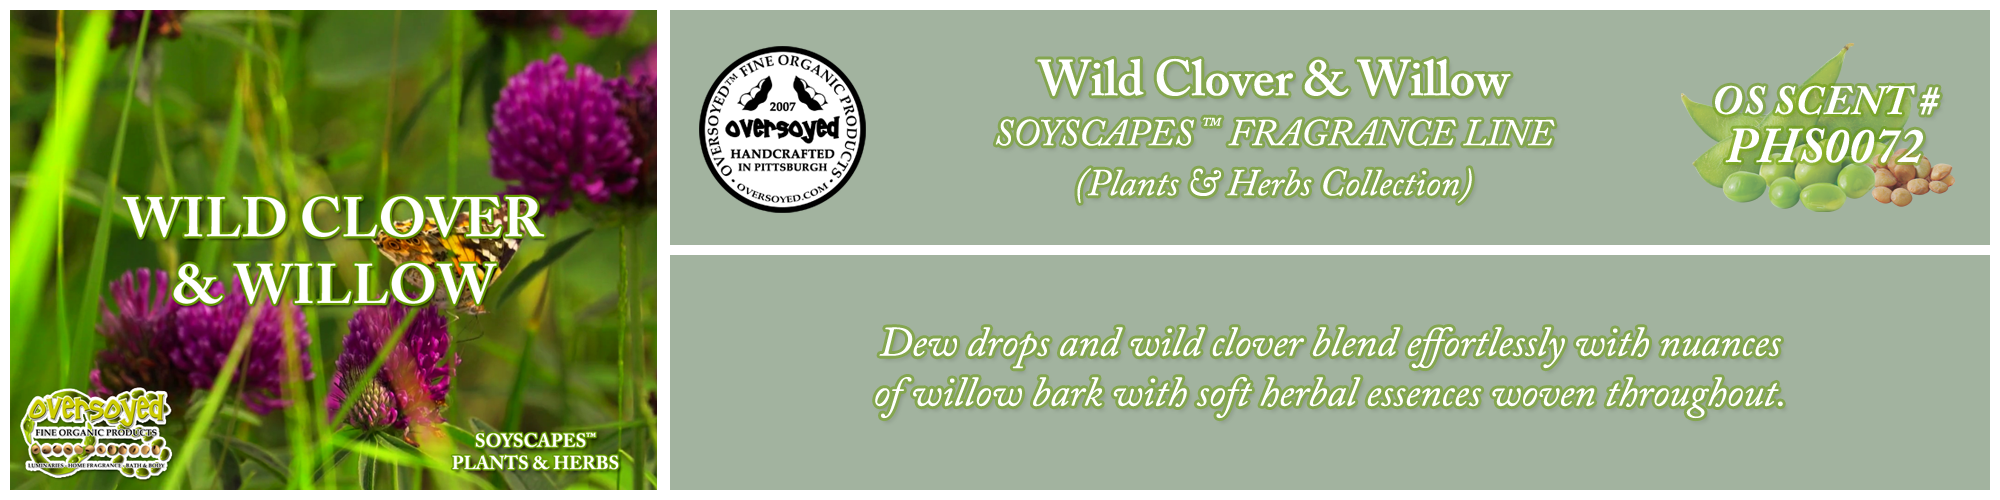 Wild Clover & Willow Handcrafted Products Collection